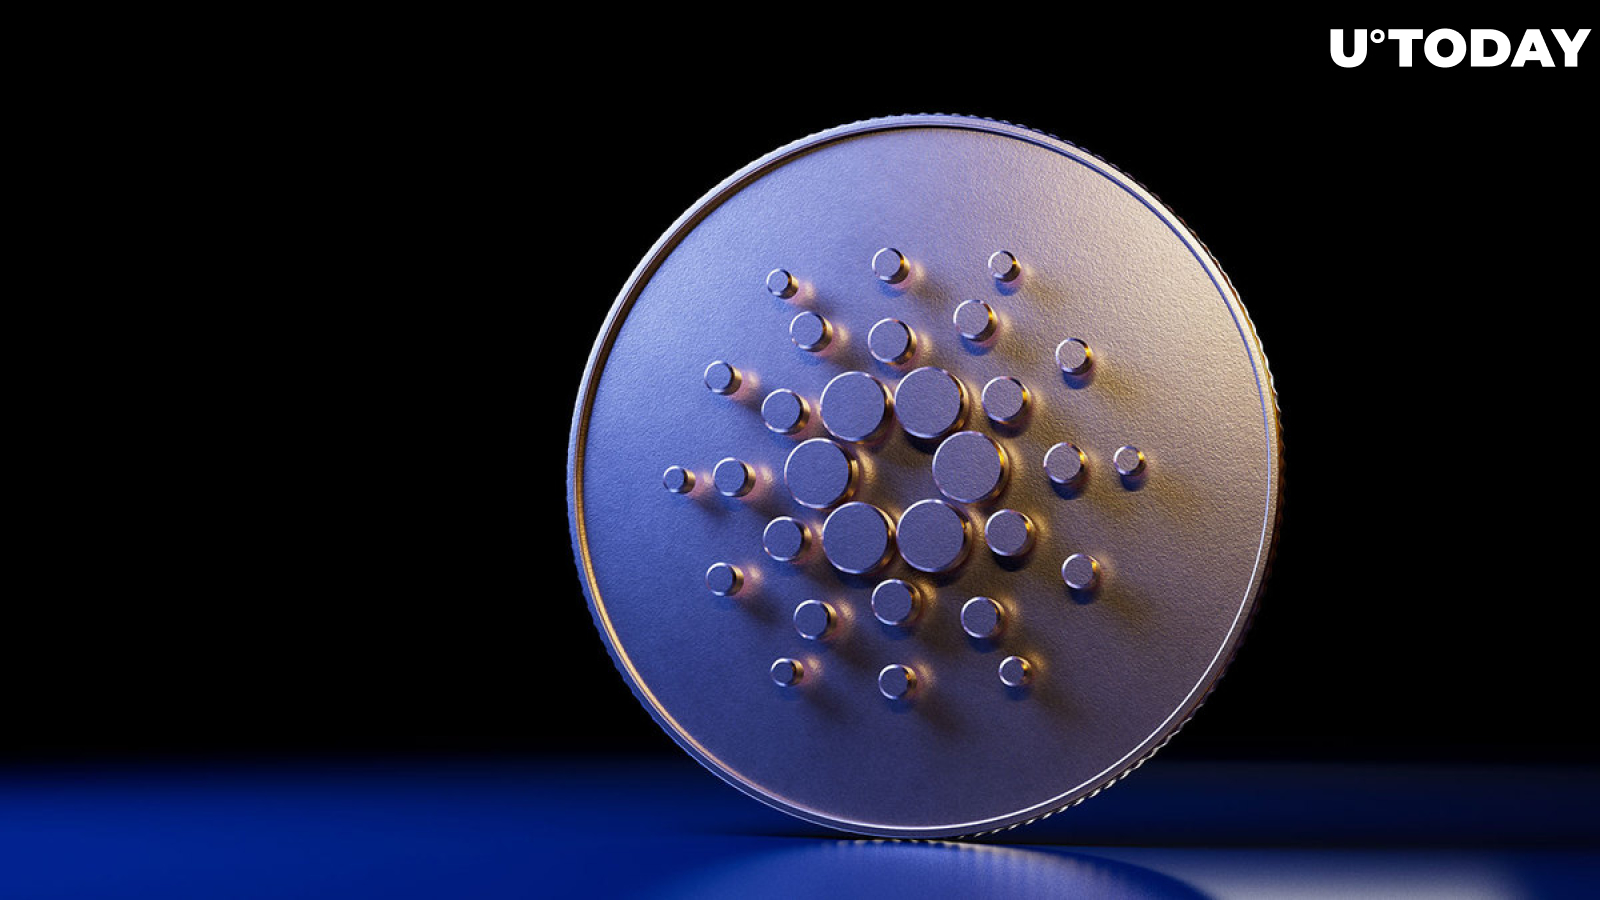 May Cardano (ADA) Be 2023 Highlight of Cryptocurrency Market?